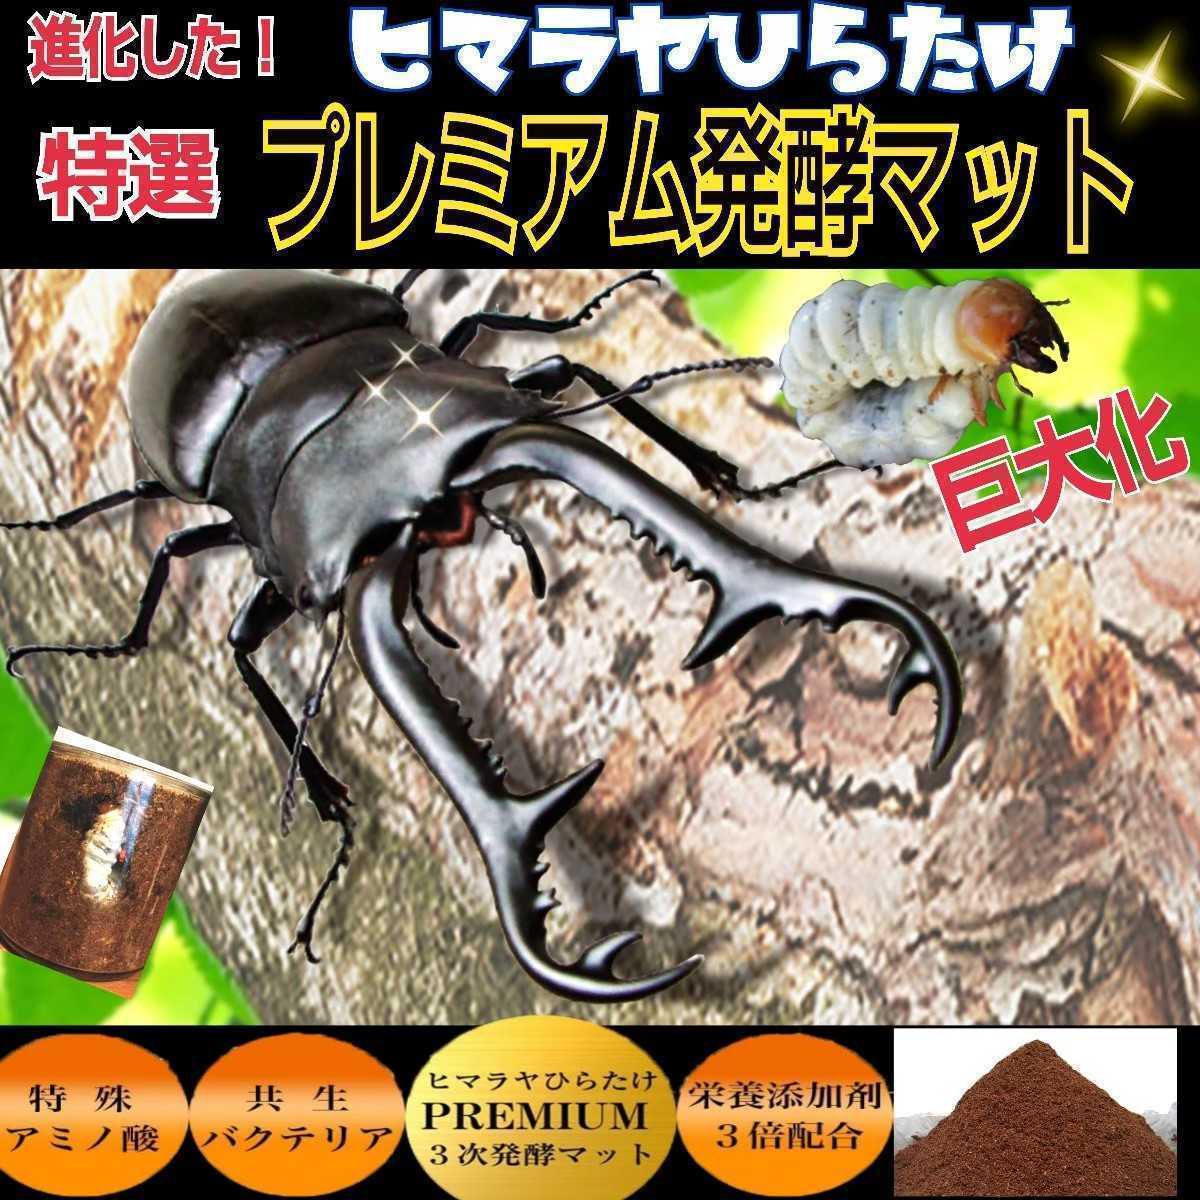  stag beetle larva . inserting only convenience.! 800ml clear bottle entering premium departure . mat [20ps.@] Miyama, Anne te,nijiiro etc. the first . from OK